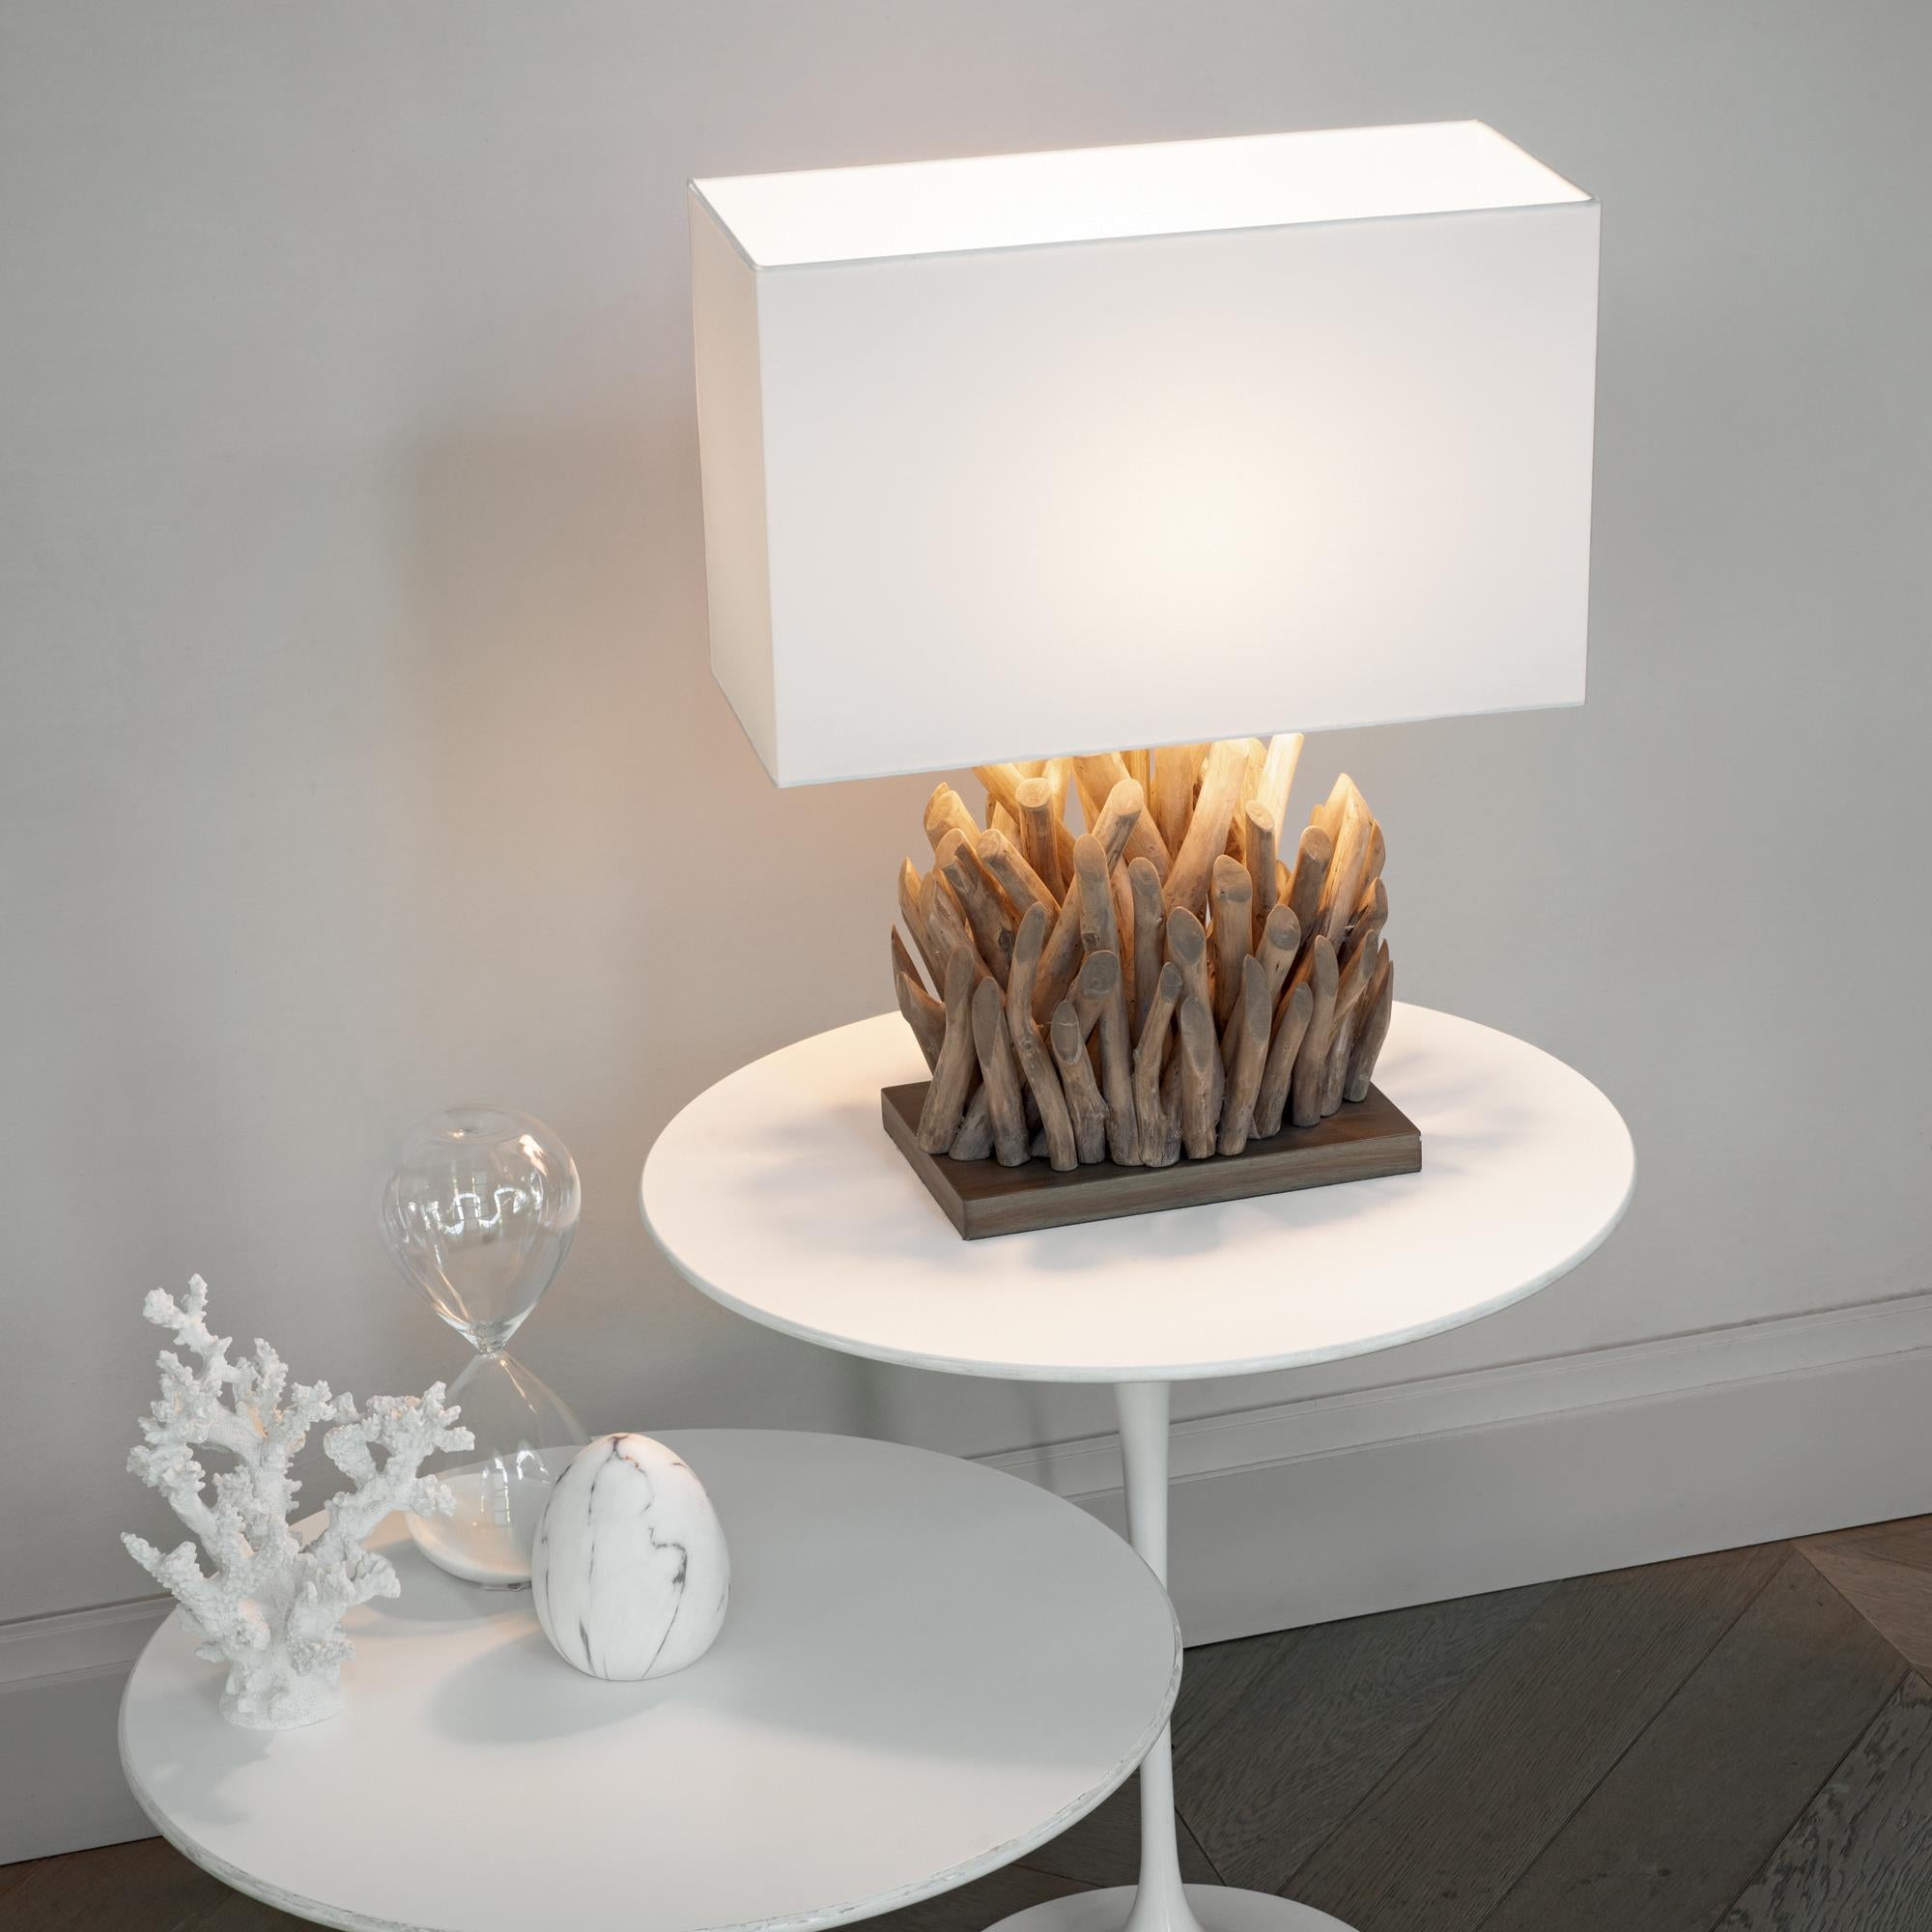 Snell lamp - Ideal Lux